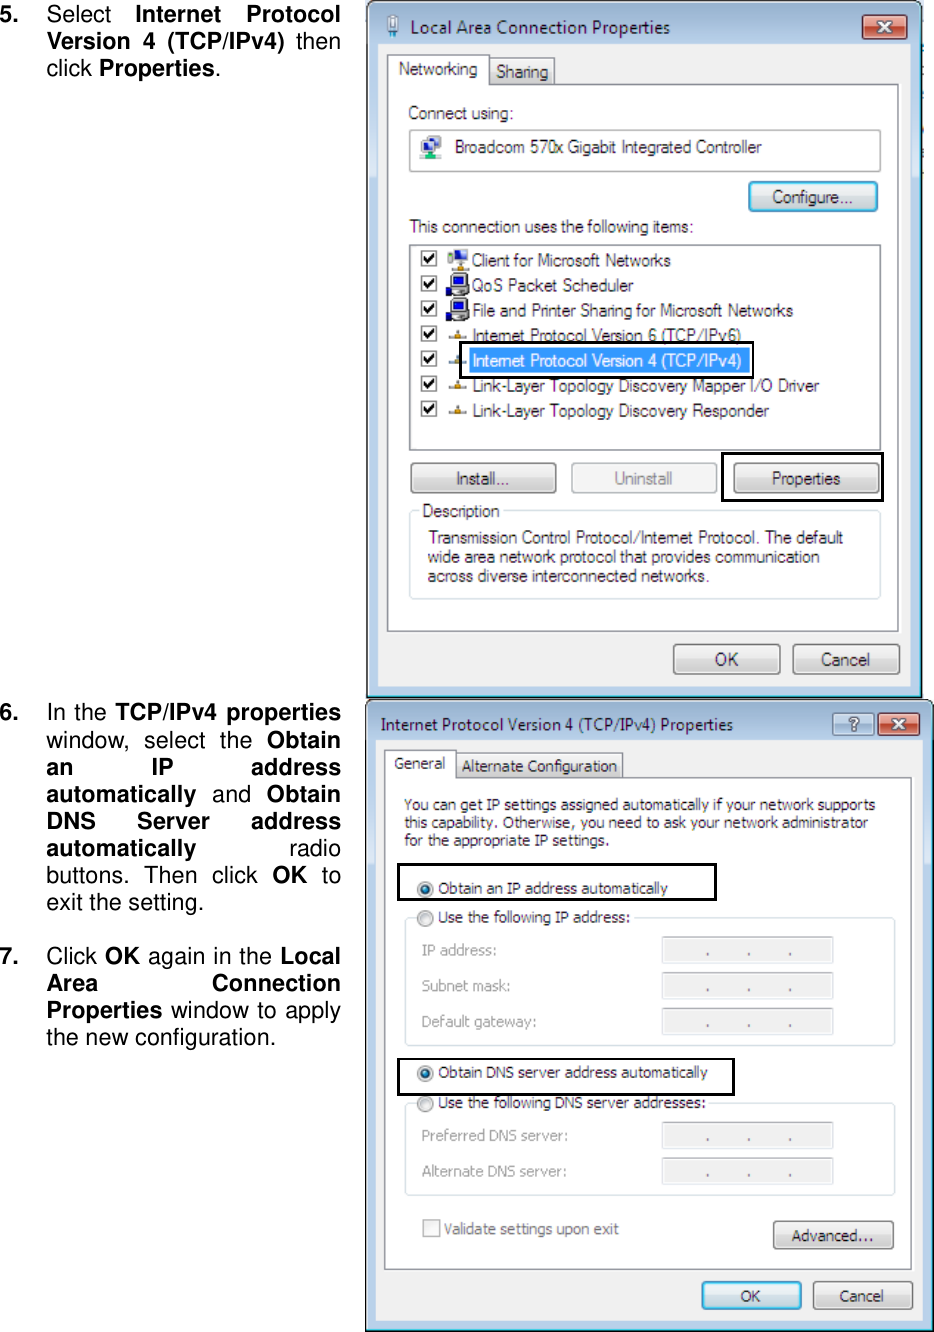    5.  Select  Internet  Protocol Version  4  (TCP/IPv4)  then click Properties.  6.  In the TCP/IPv4 properties window,  select  the  Obtain an  IP  address automatically  and  Obtain DNS  Server  address automatically  radio buttons.  Then  click  OK  to exit the setting.  7.  Click OK again in the Local Area  Connection Properties window to apply the new configuration.  